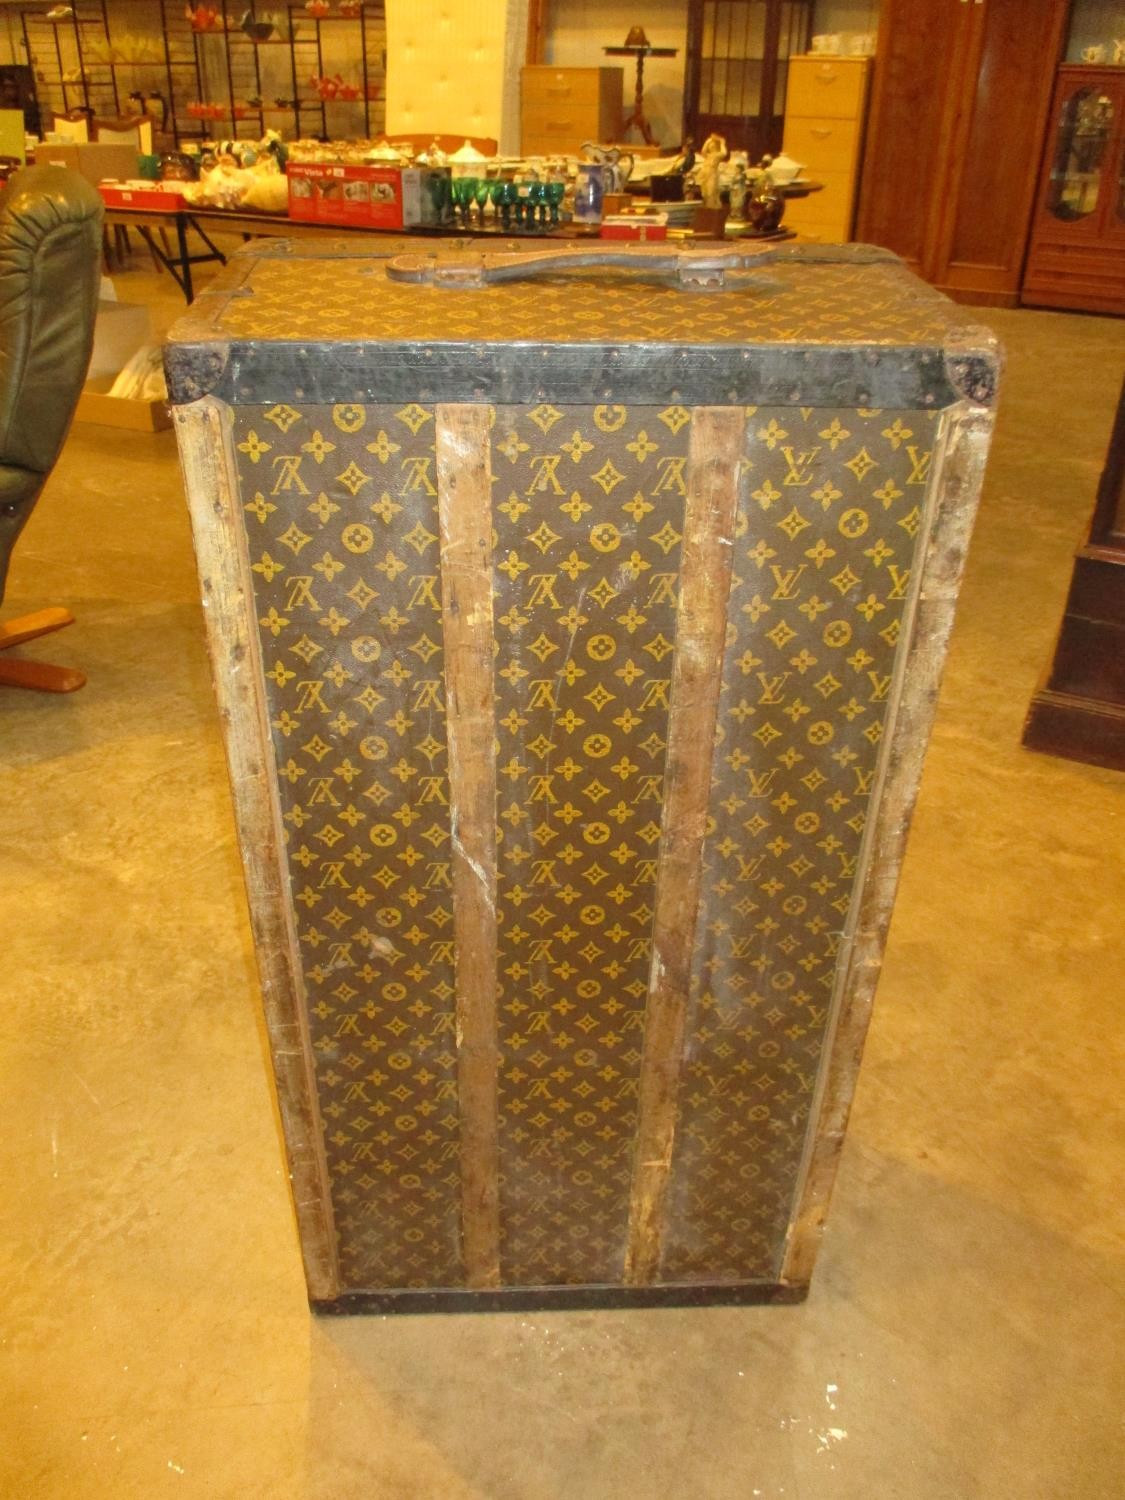 Louis Vuitton Cabin Trunk, Early 20th Century, covered in monogram canvas with Louis Vuitton label - Image 7 of 11